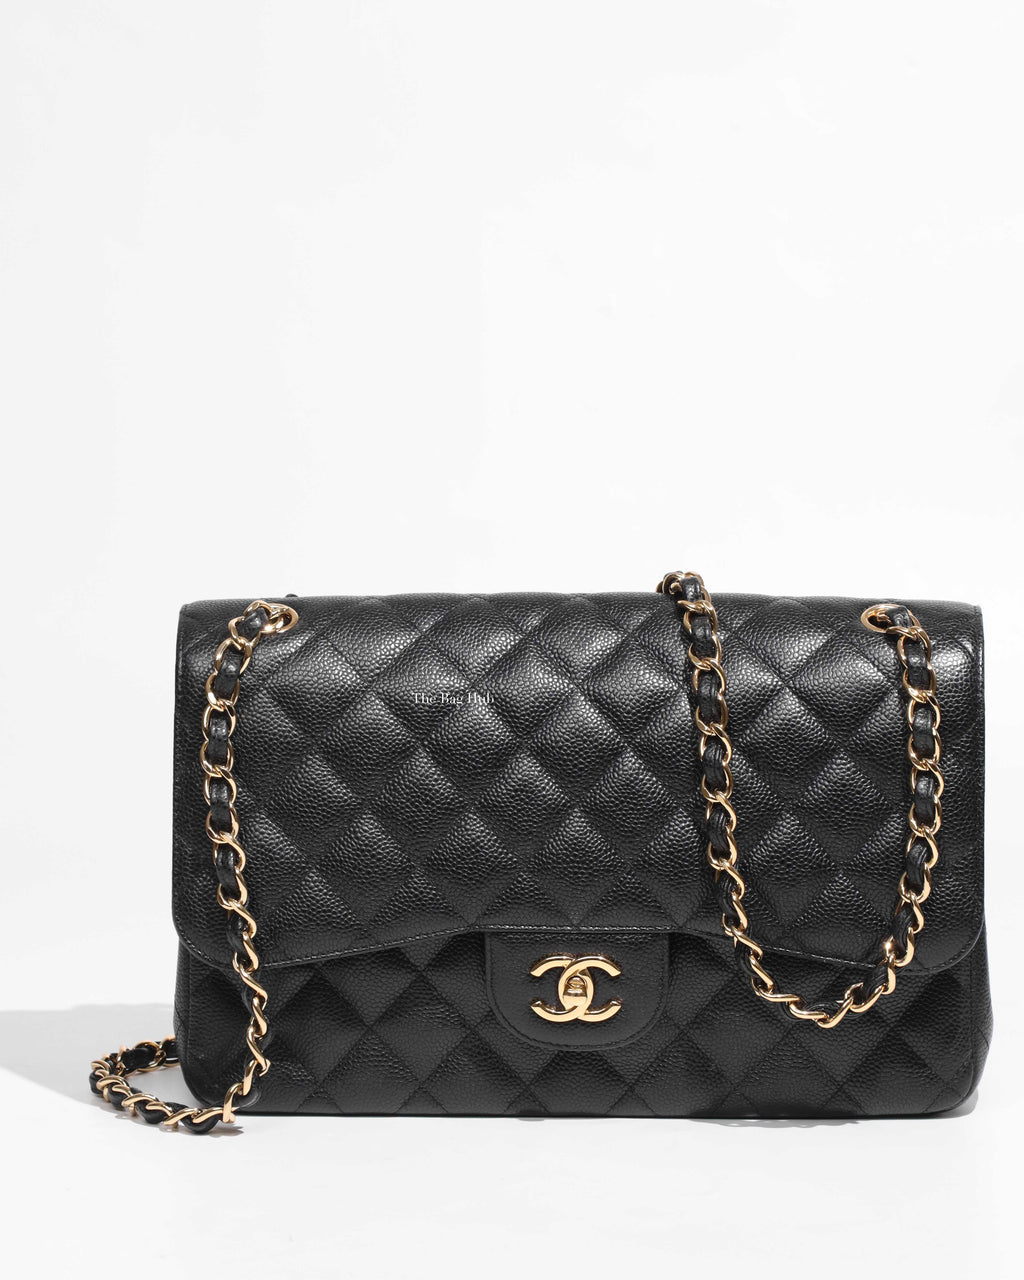 The Classy Chanel Bag From Emily in Paris